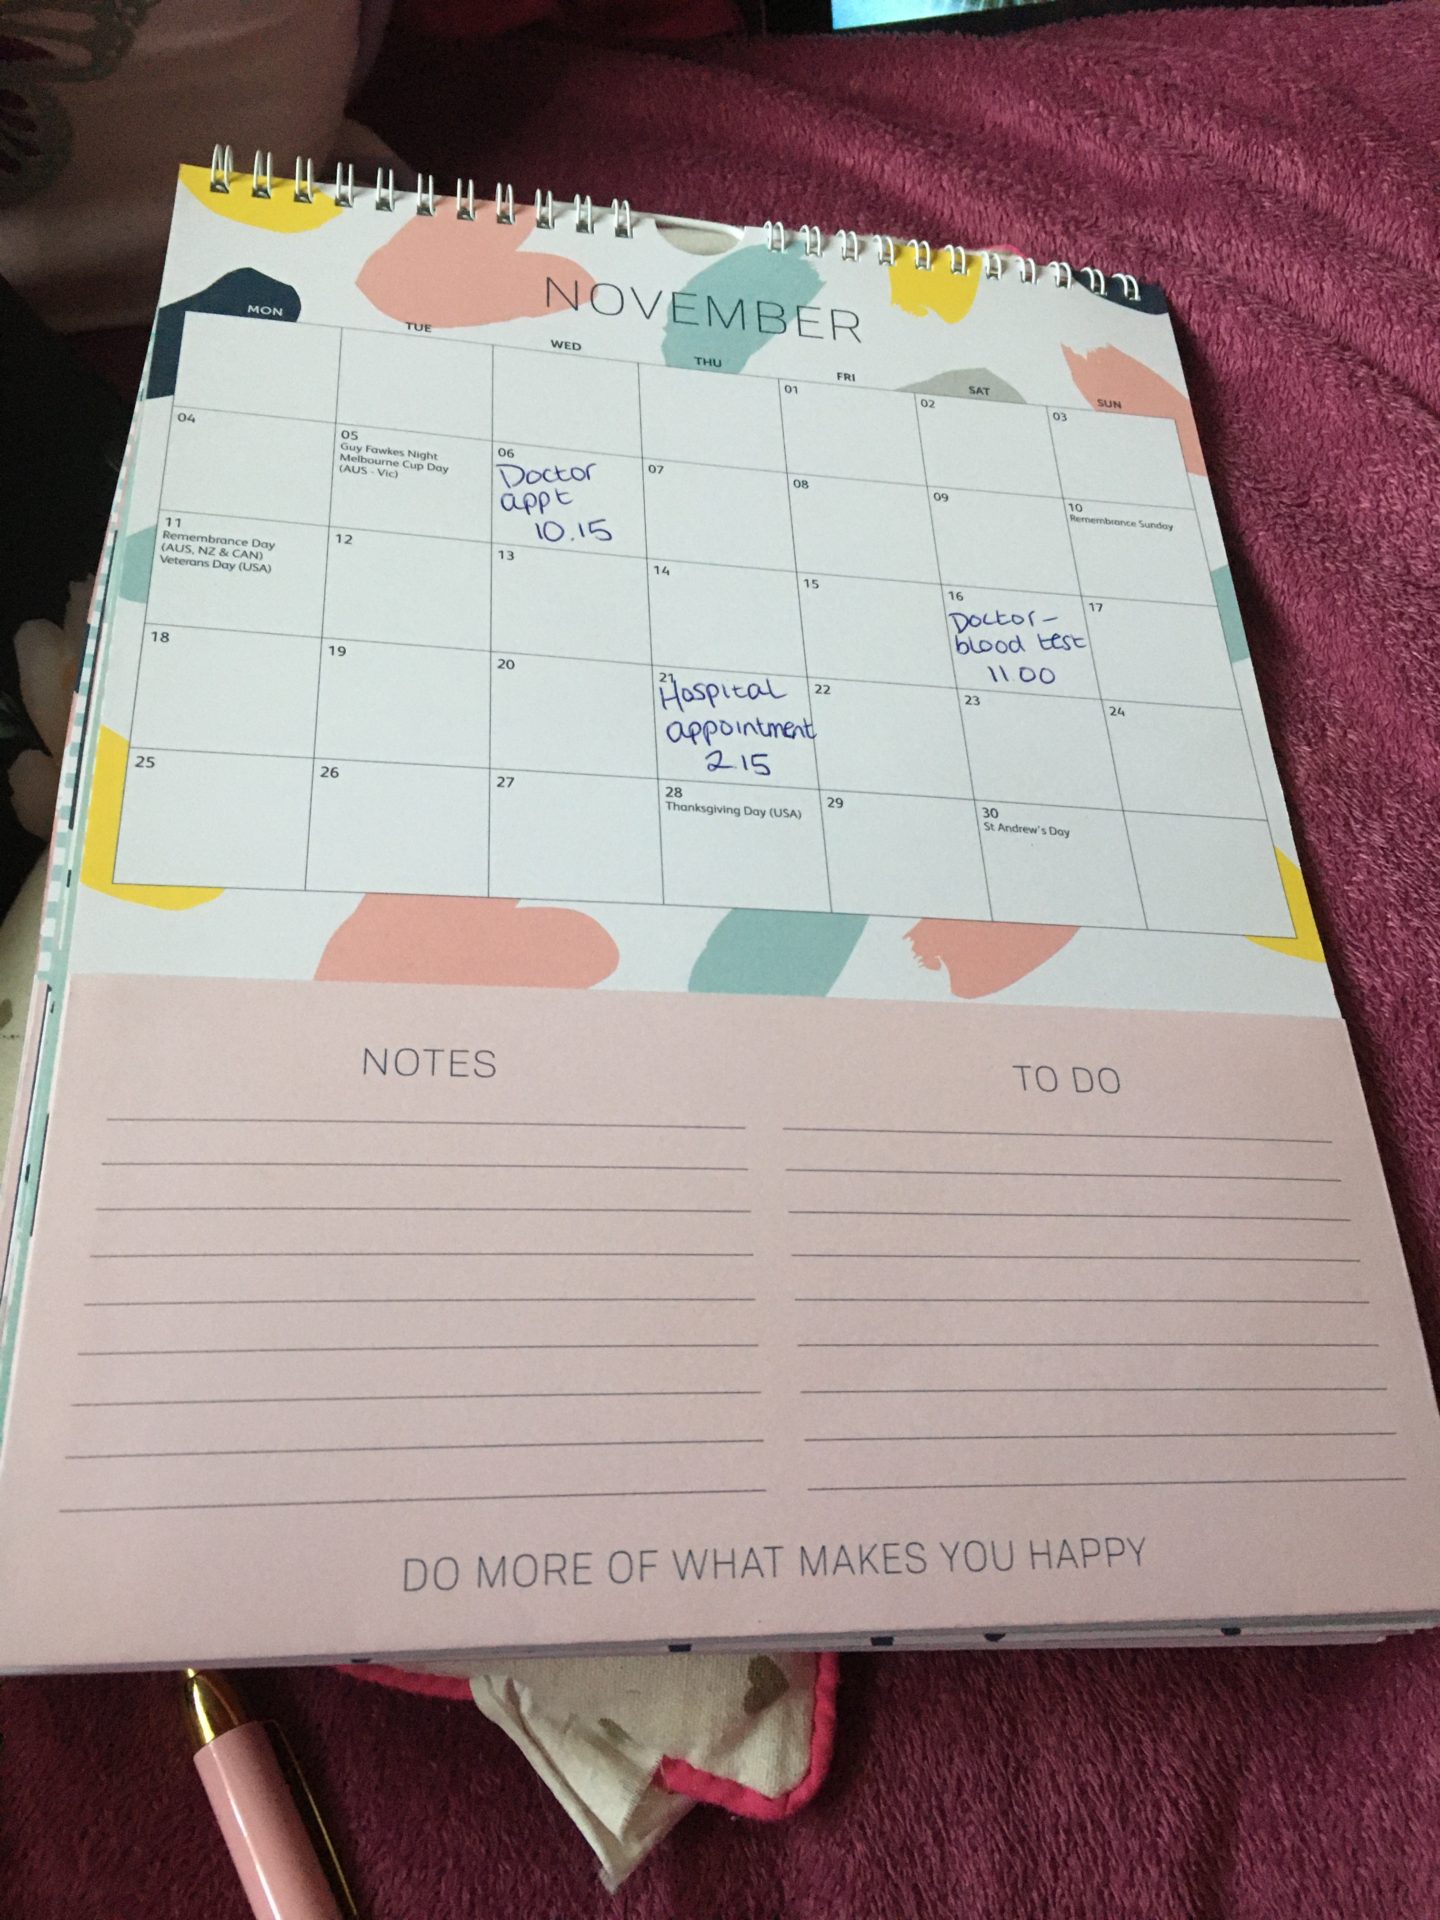 calendar of appointments - life with a chronic illness!